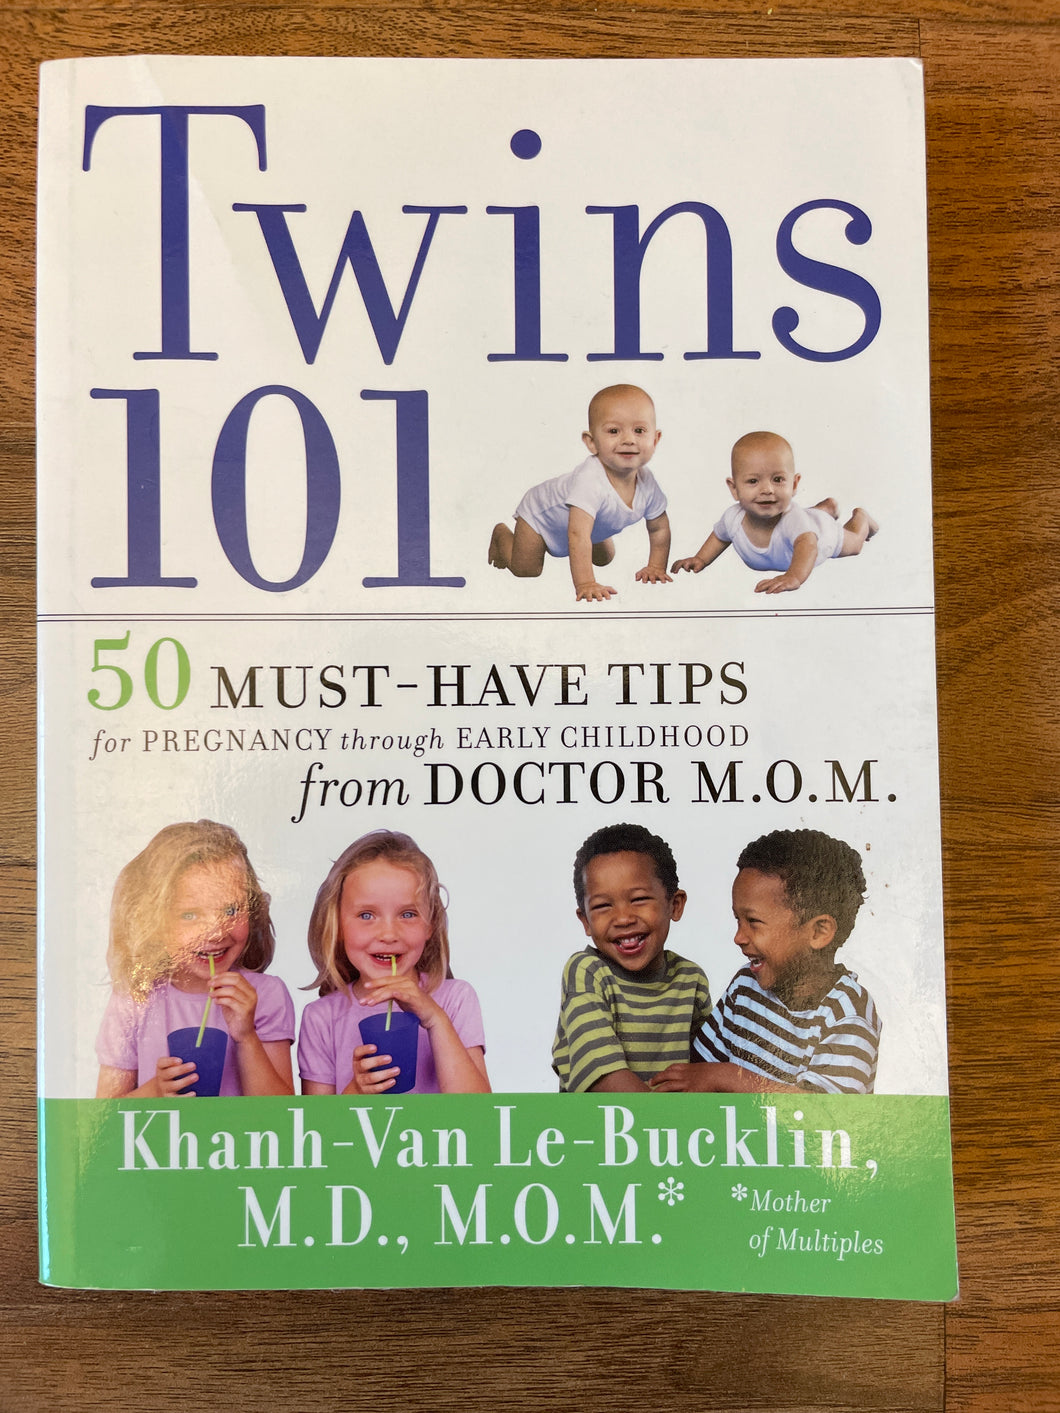 Twins 101 50 must have tips for pregnancy through early childhood